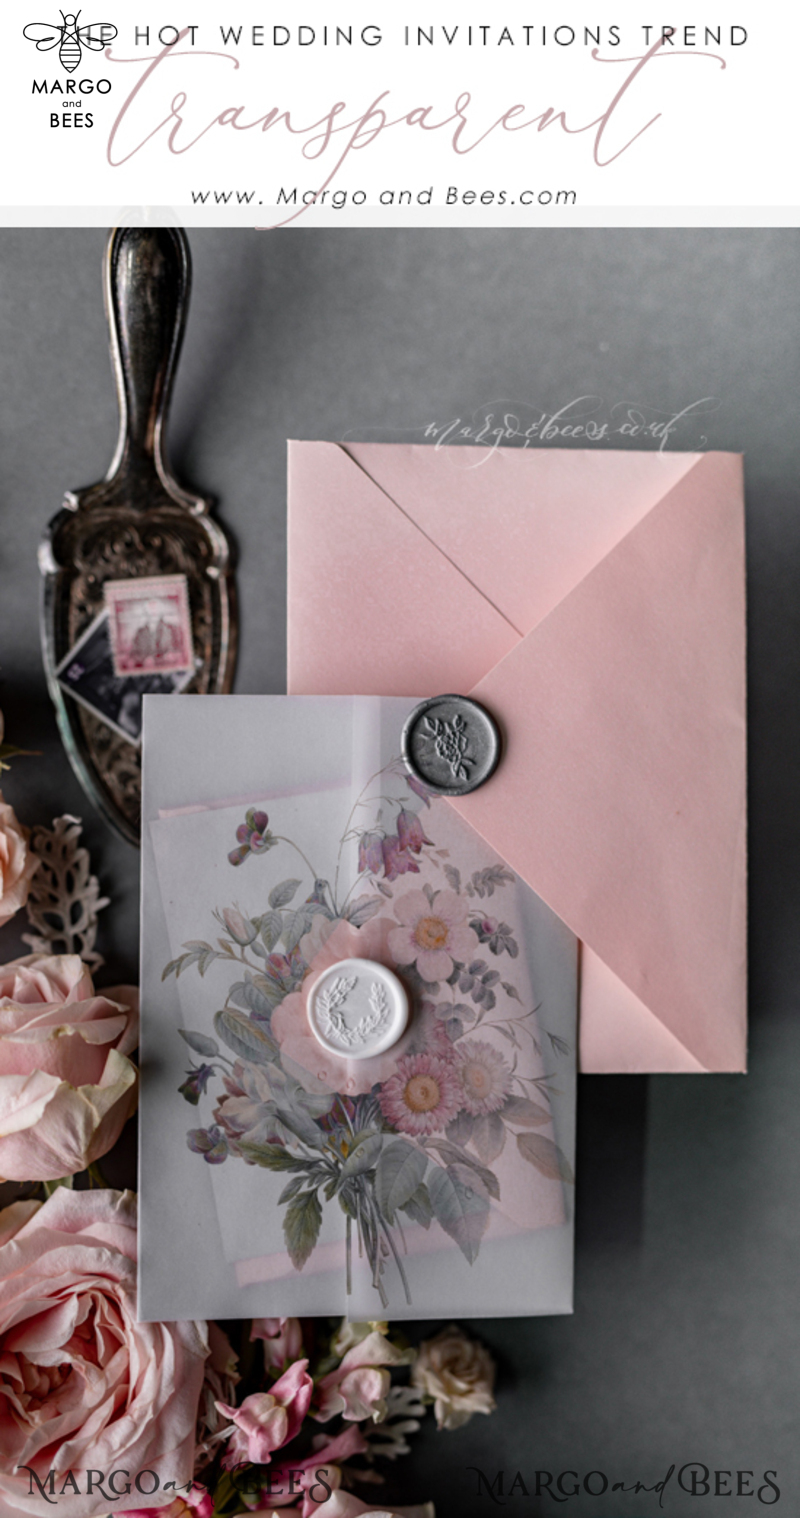 Blossom Personalized Wedding invitations Transparent Stationery with Vellum and Wax Seal -47